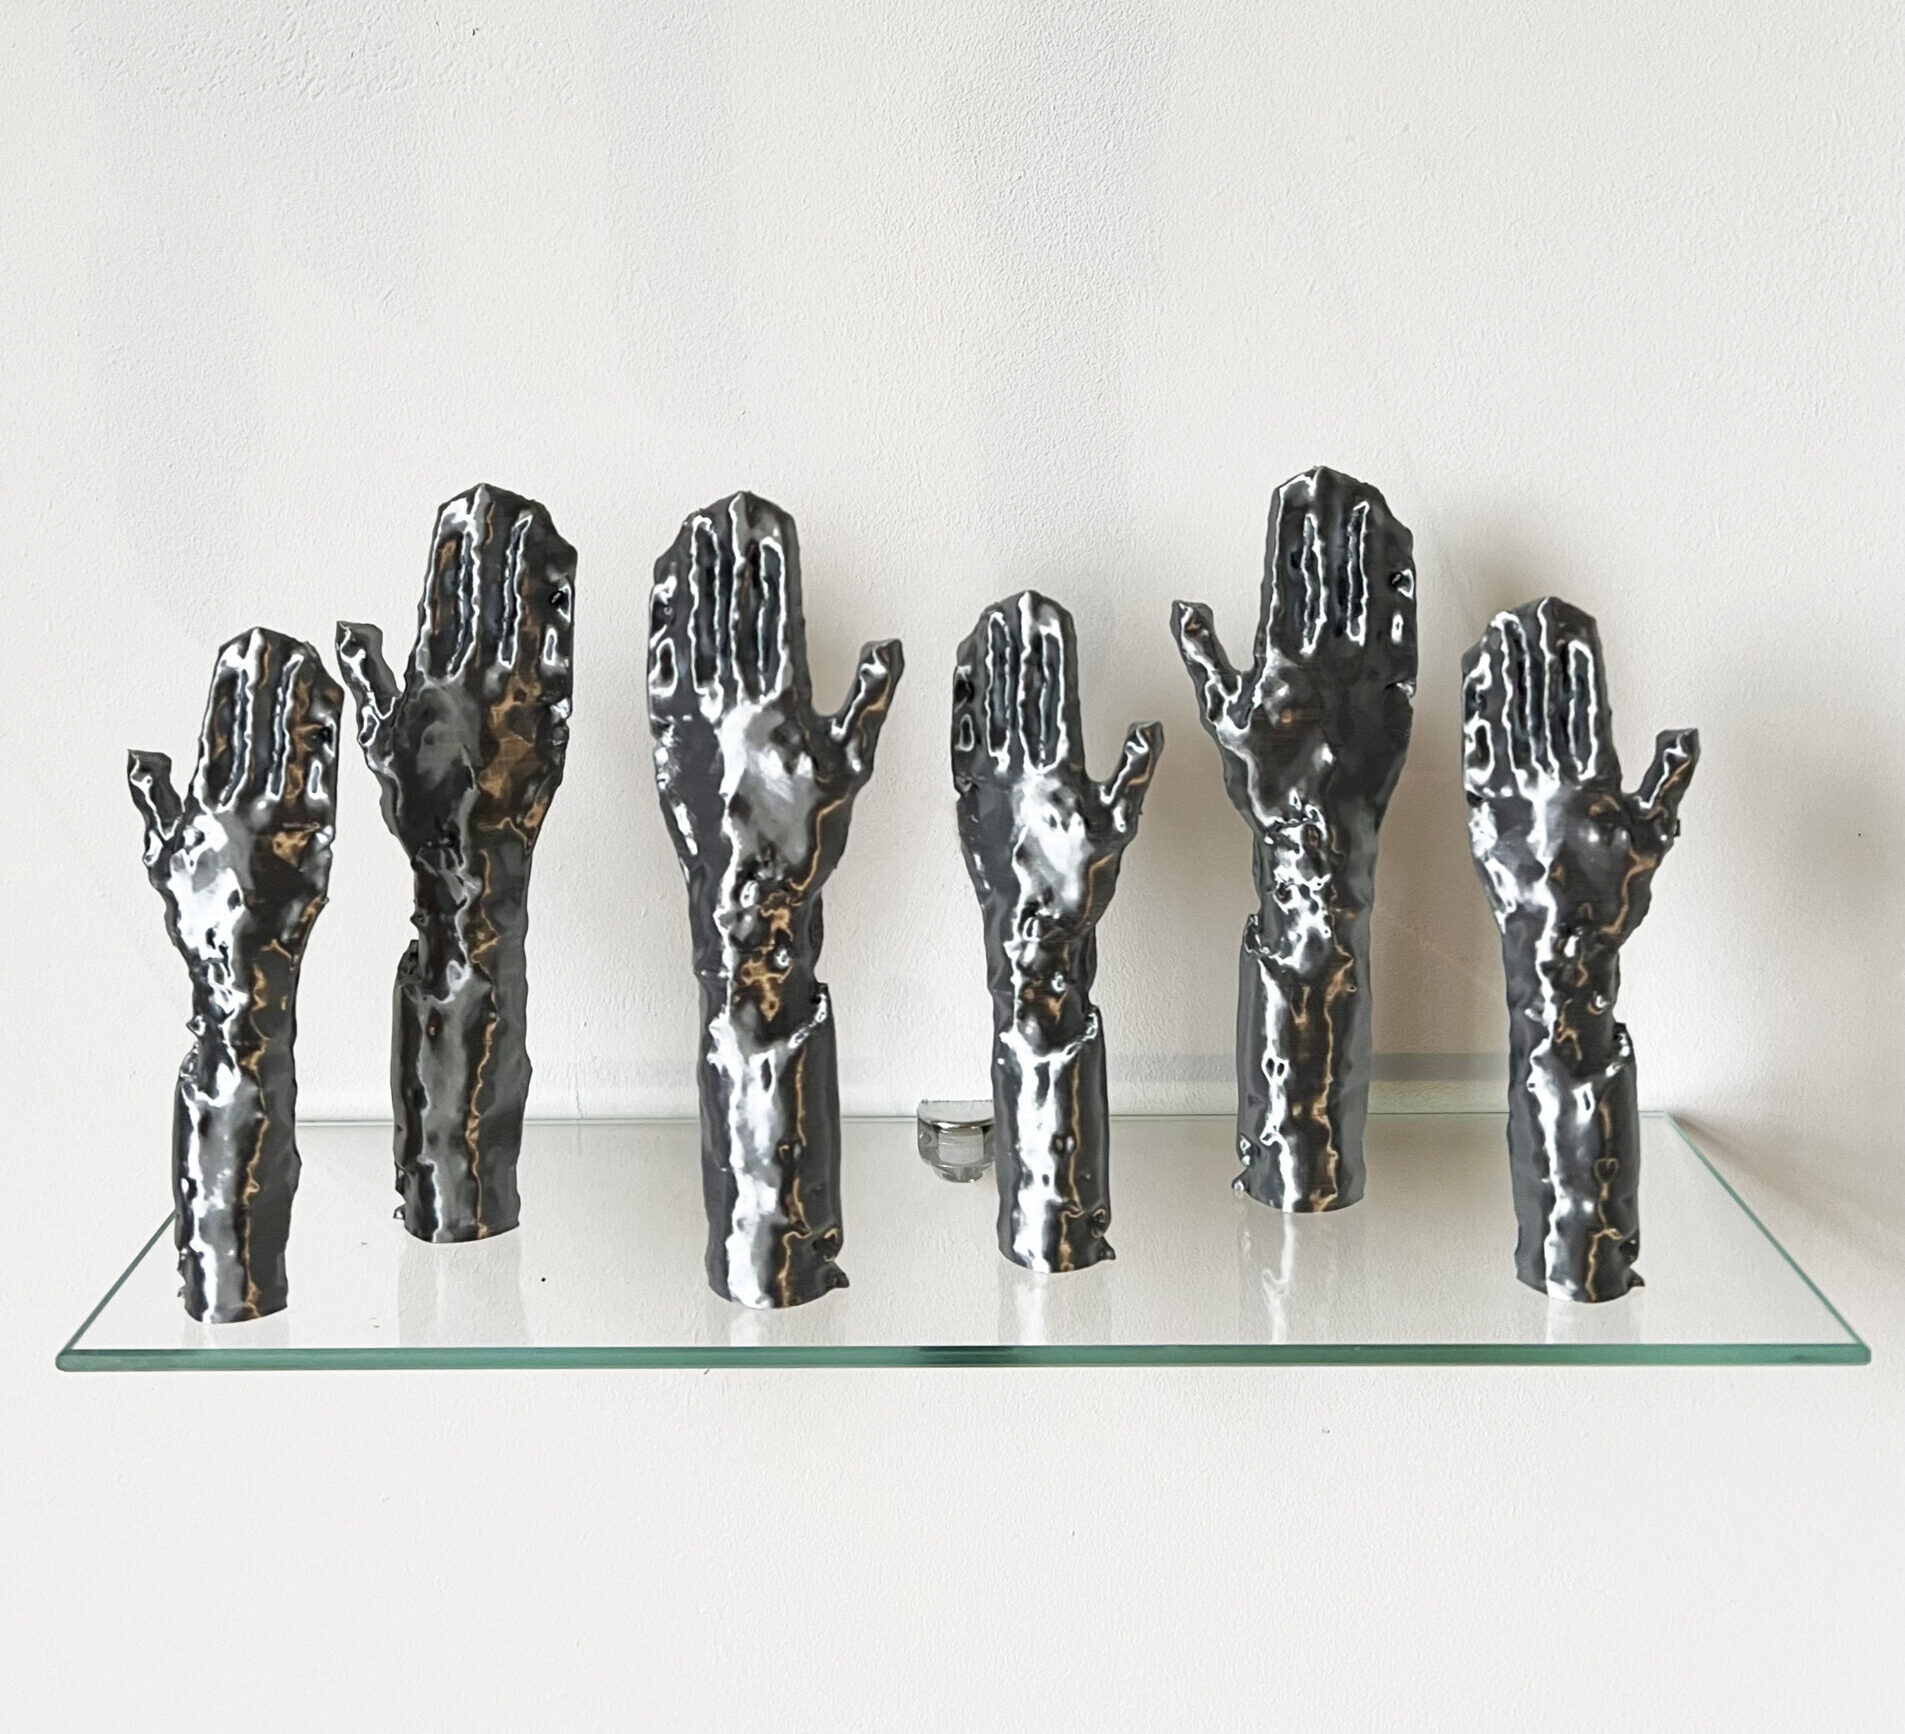 Jeffrey Knopf, ‘A Show of Hands’, glass and 3D printed plastic, 2022. Courtesy of the artist